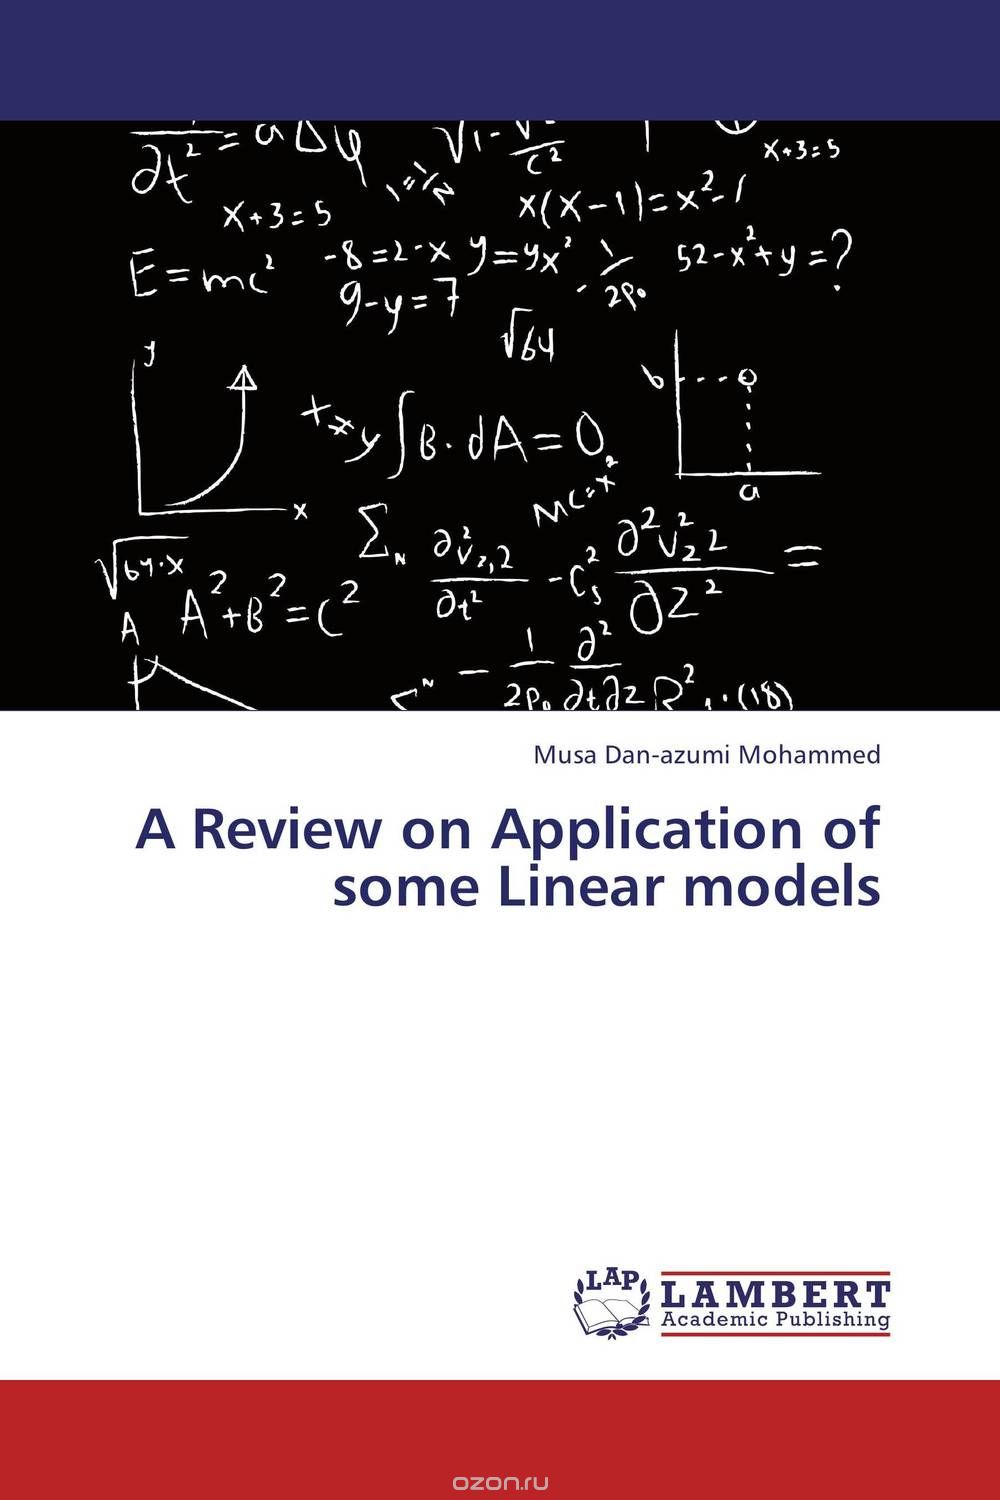 Скачать книгу "A Review on Application of some Linear models"